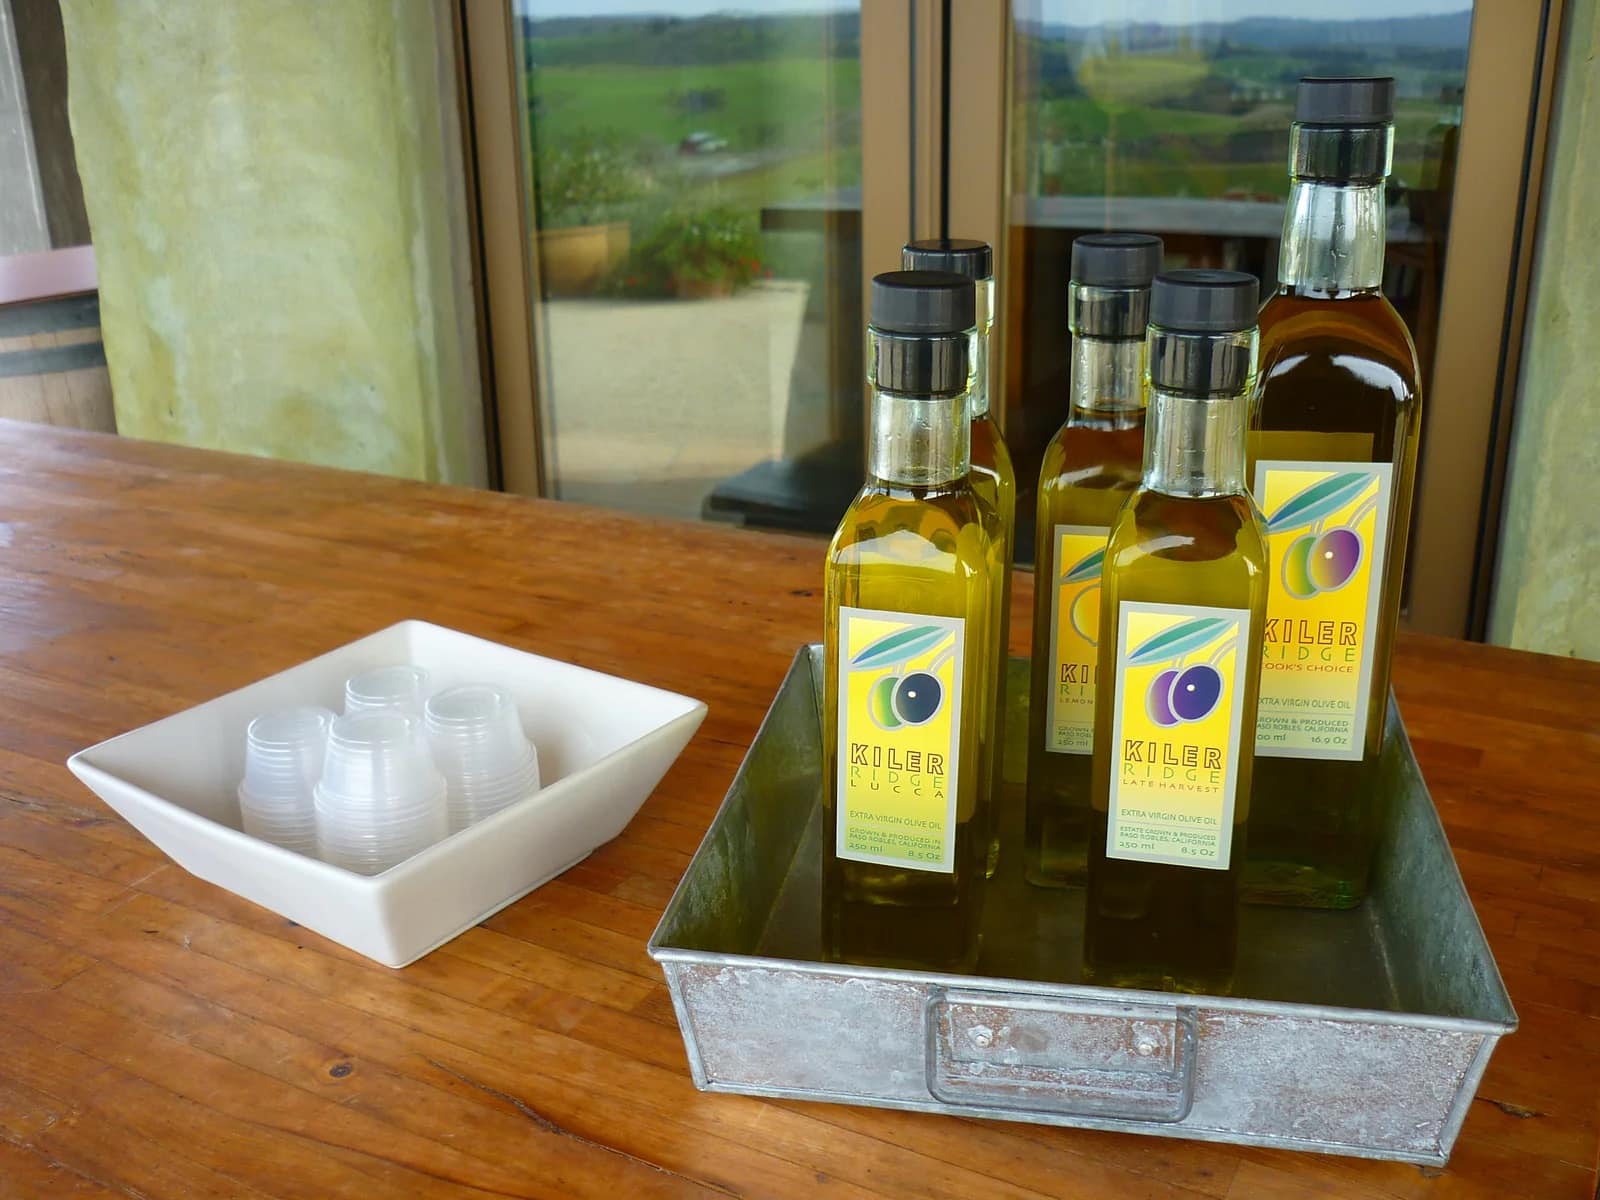 Bottles of Kiler Ridge extra virgin olive oil displayed on a wooden table with a scenic view of the rolling hills of Paso Robles in the background